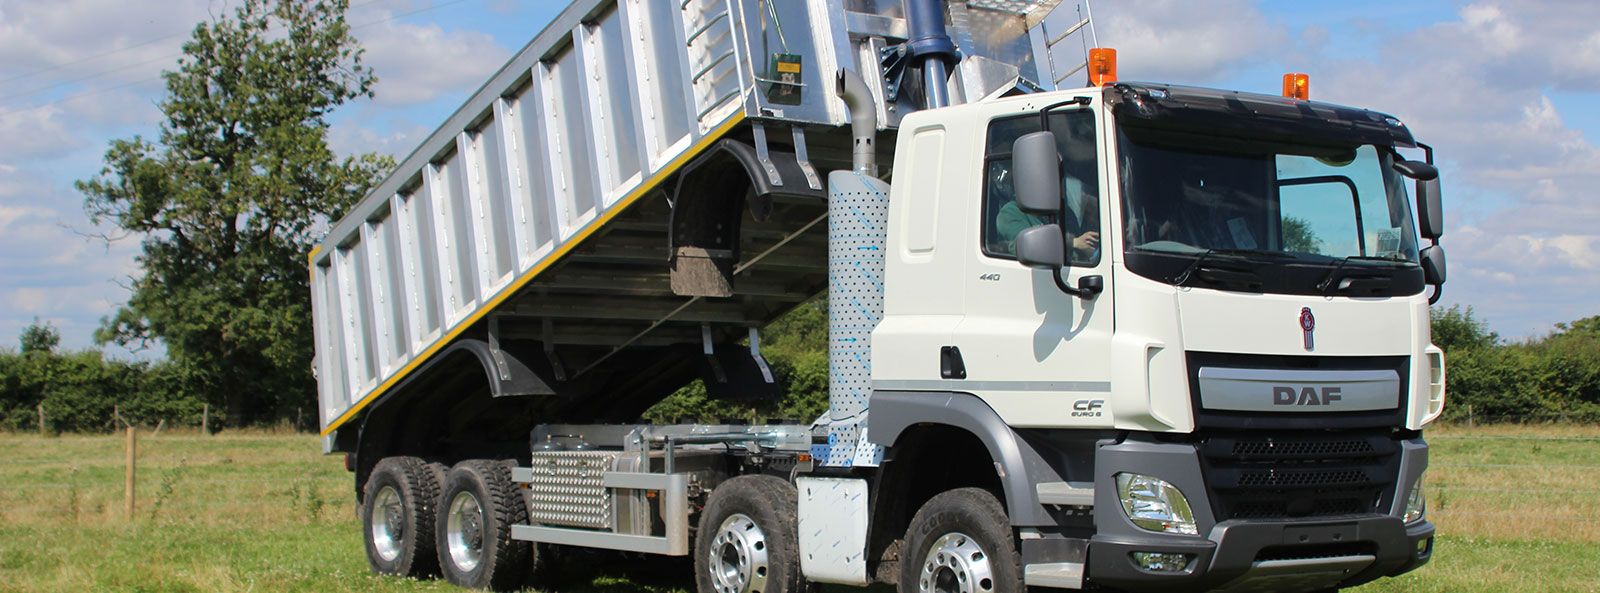 Tipper Bodies and Fabrication